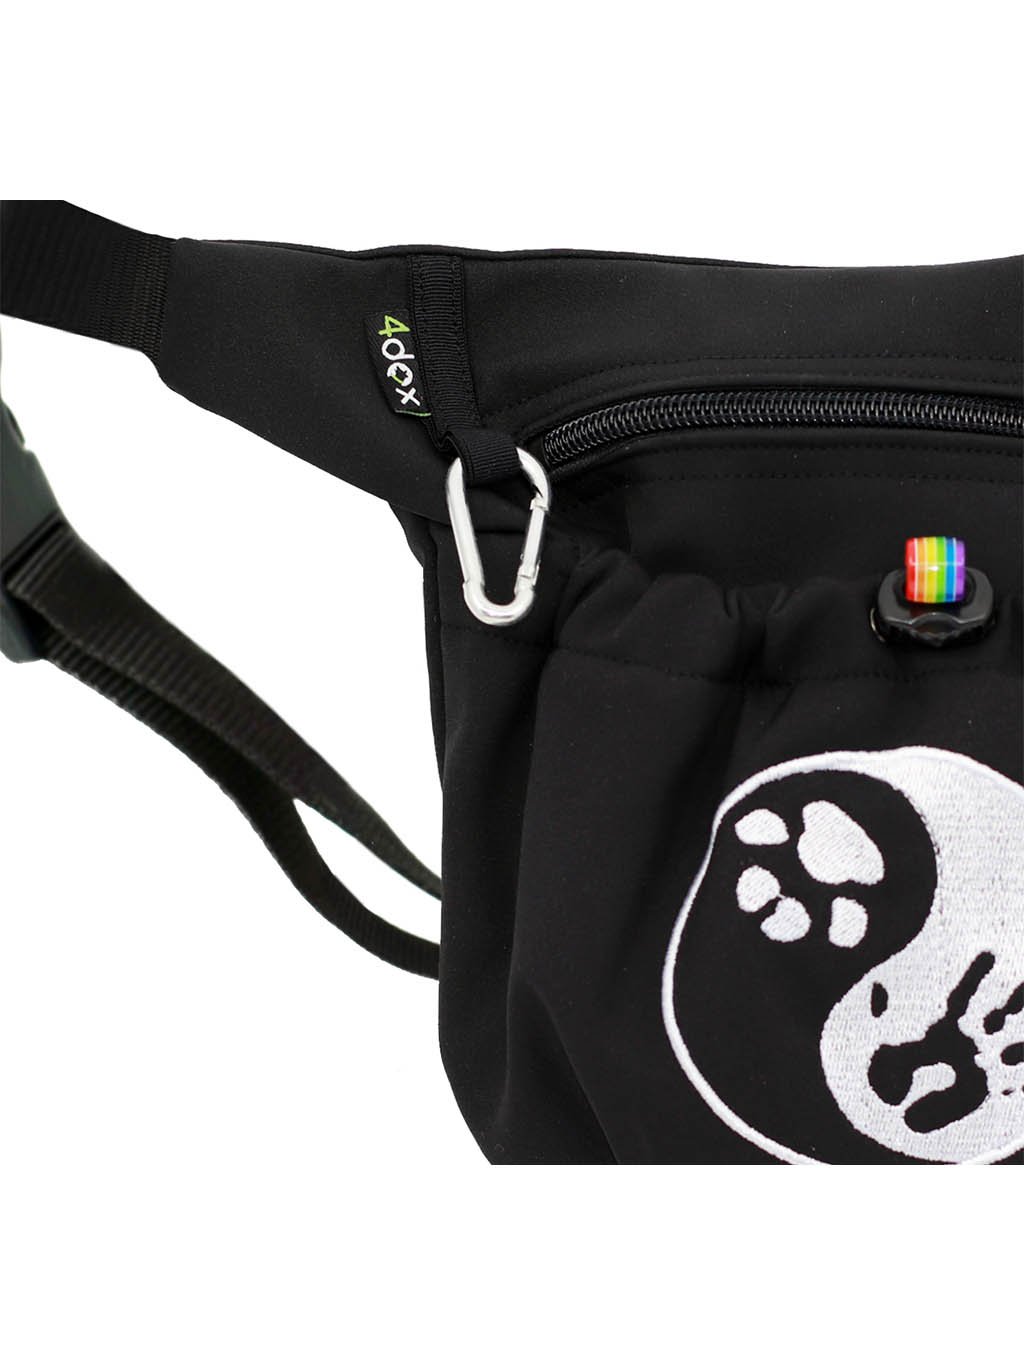 Dog training treat pouch 2 in 1 Dog Yin and Yang No. 9